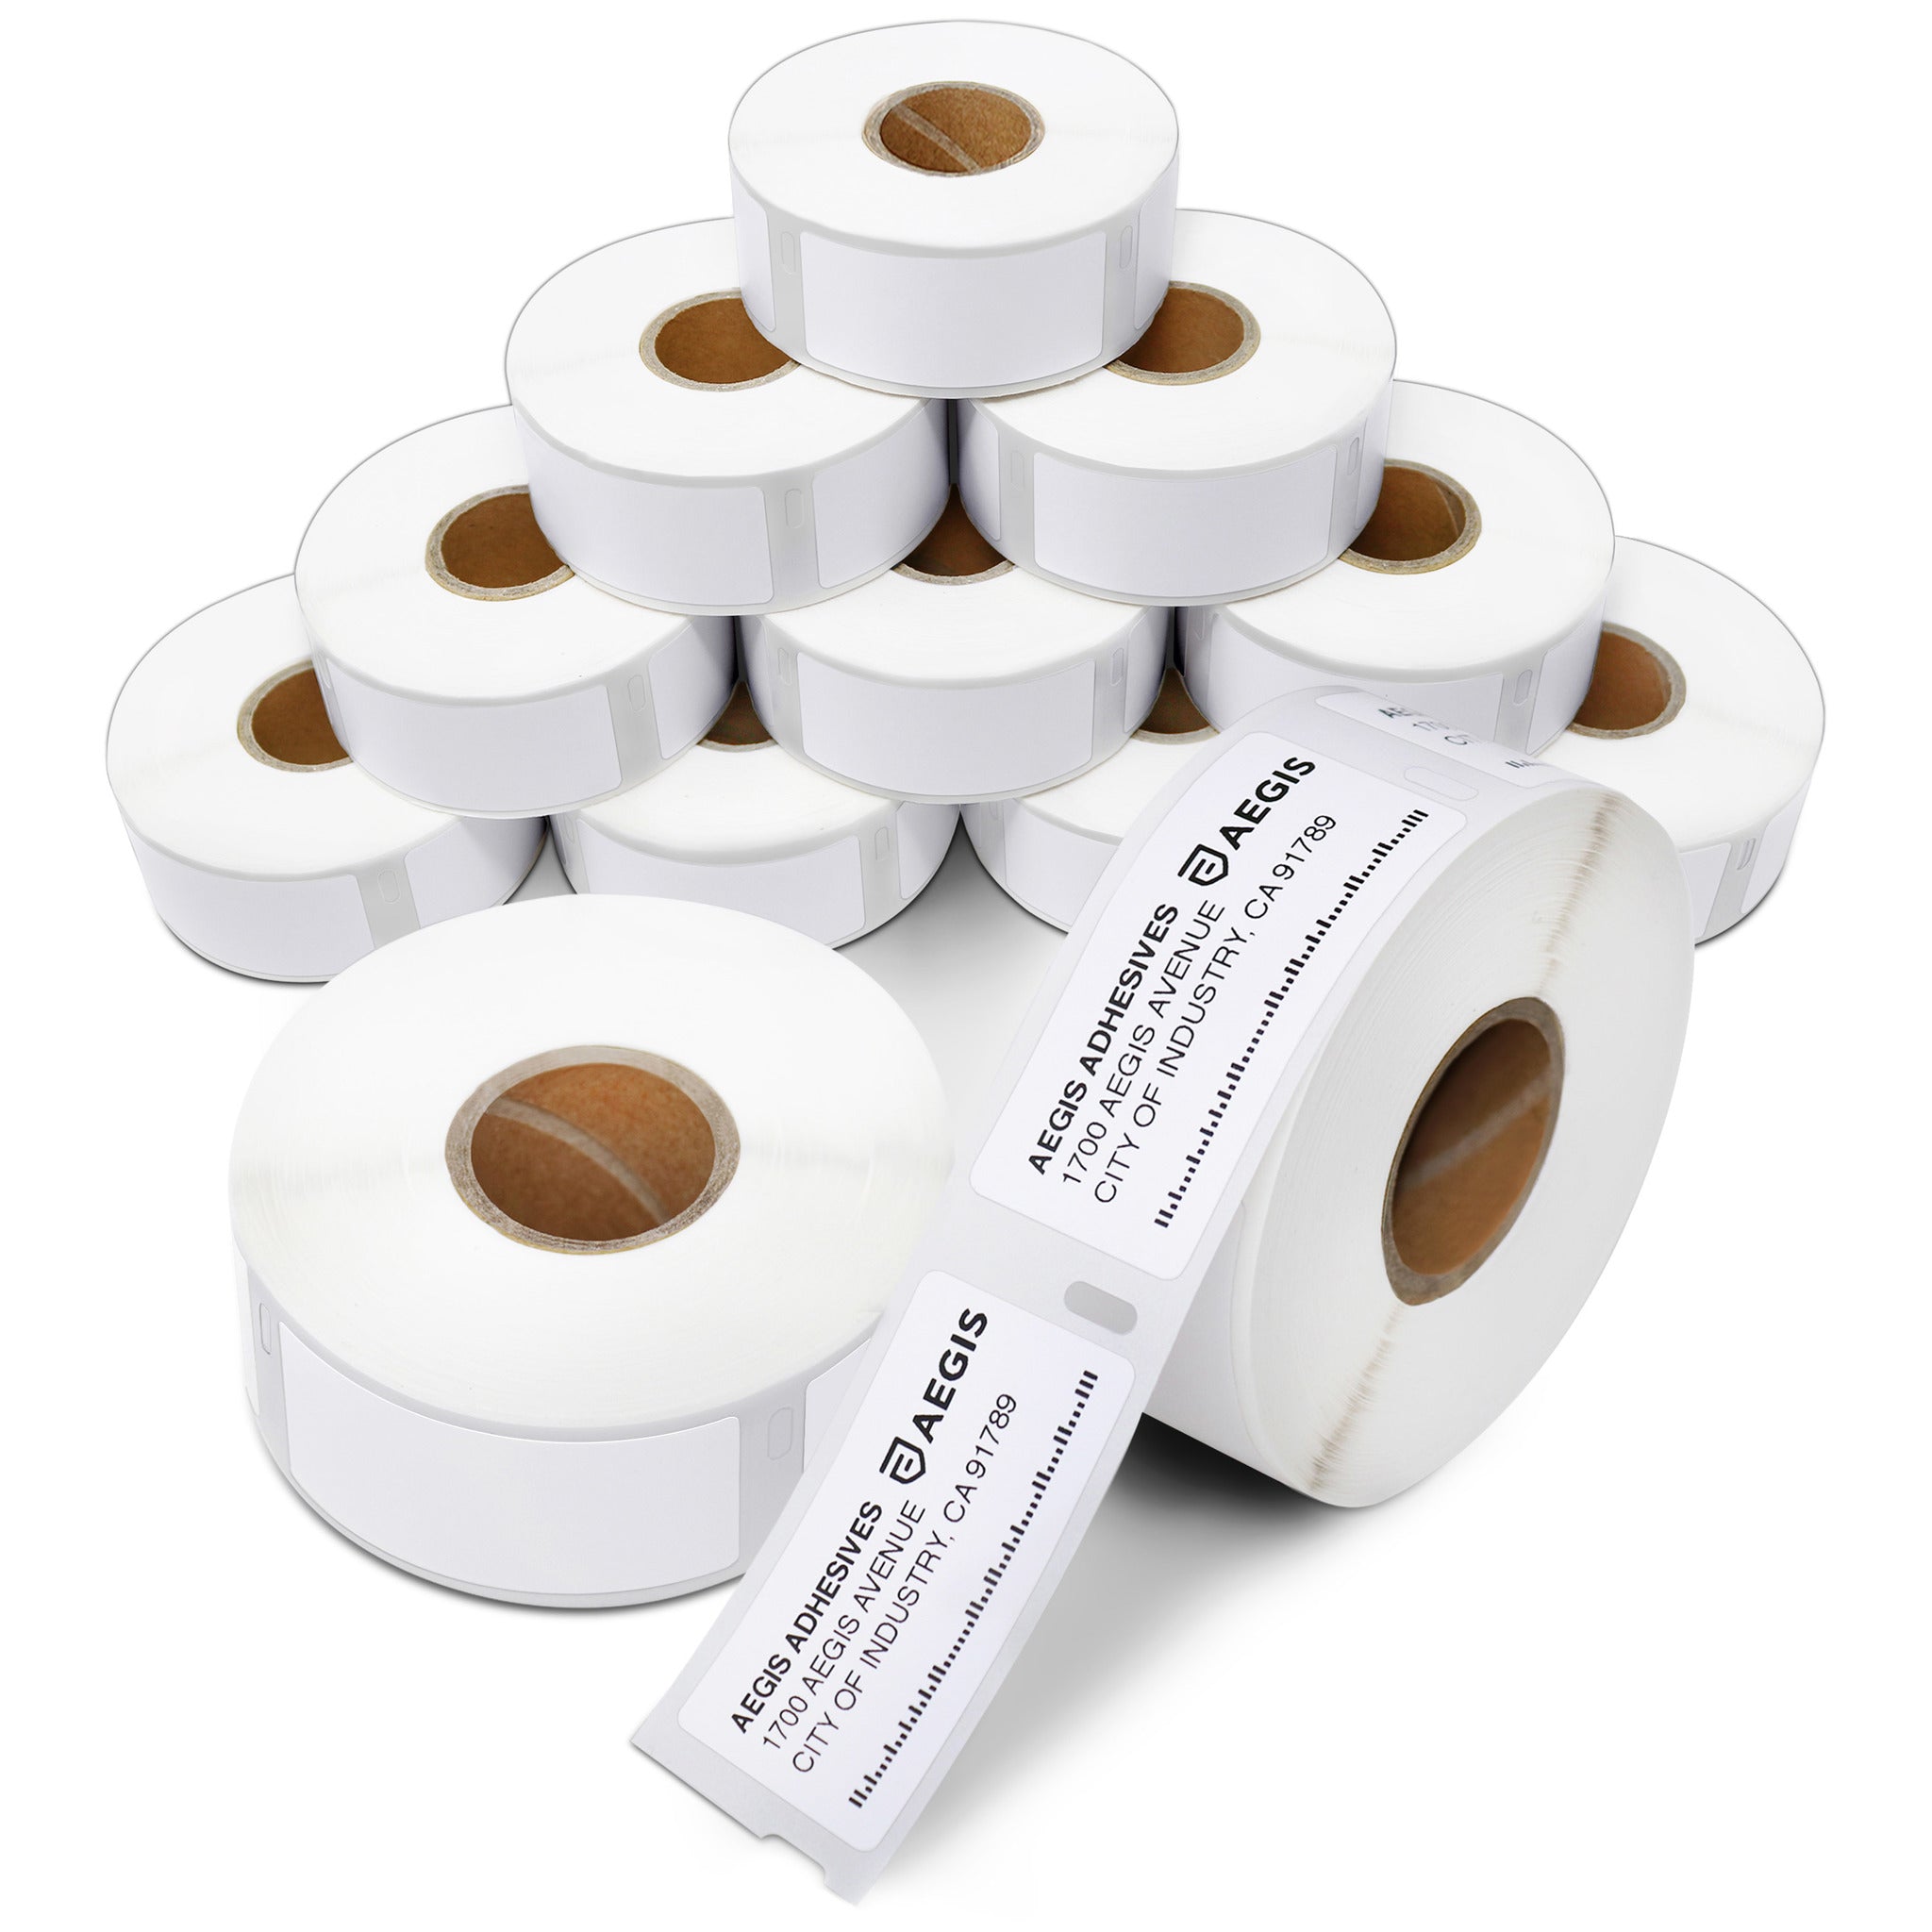  HOUSELABELS Compatible DYMO 30336 Multipurpose Labels (1 x  2-1/8) in Polypropylene Compatible with Rollo, Some DYMO LW Printers, 36  Rolls / 500 Labels per Roll : Office Products